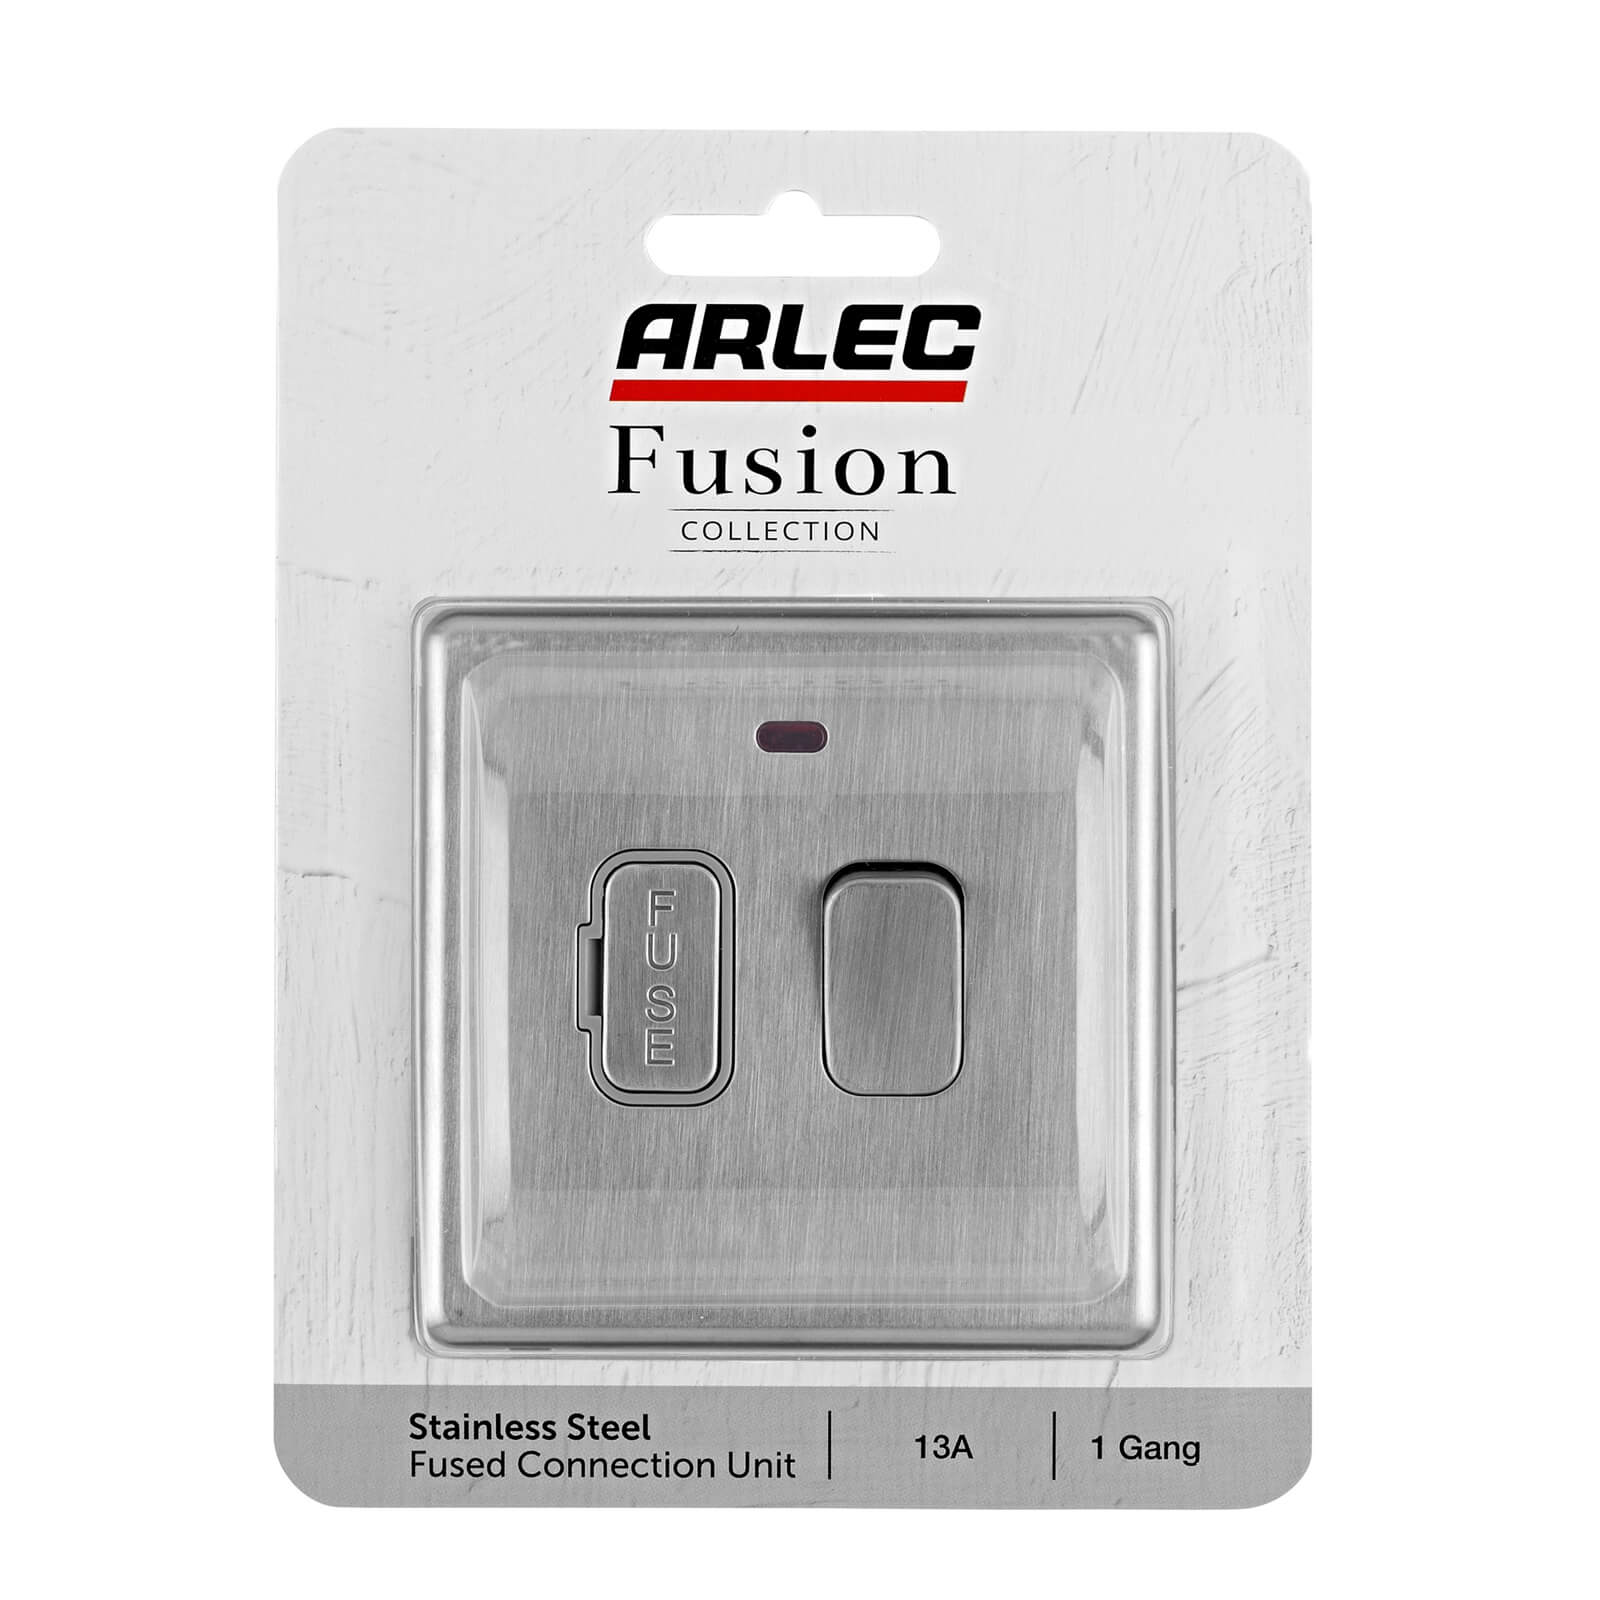 Arlec Fusion 13A Stainless Steel Switched fused connection unit